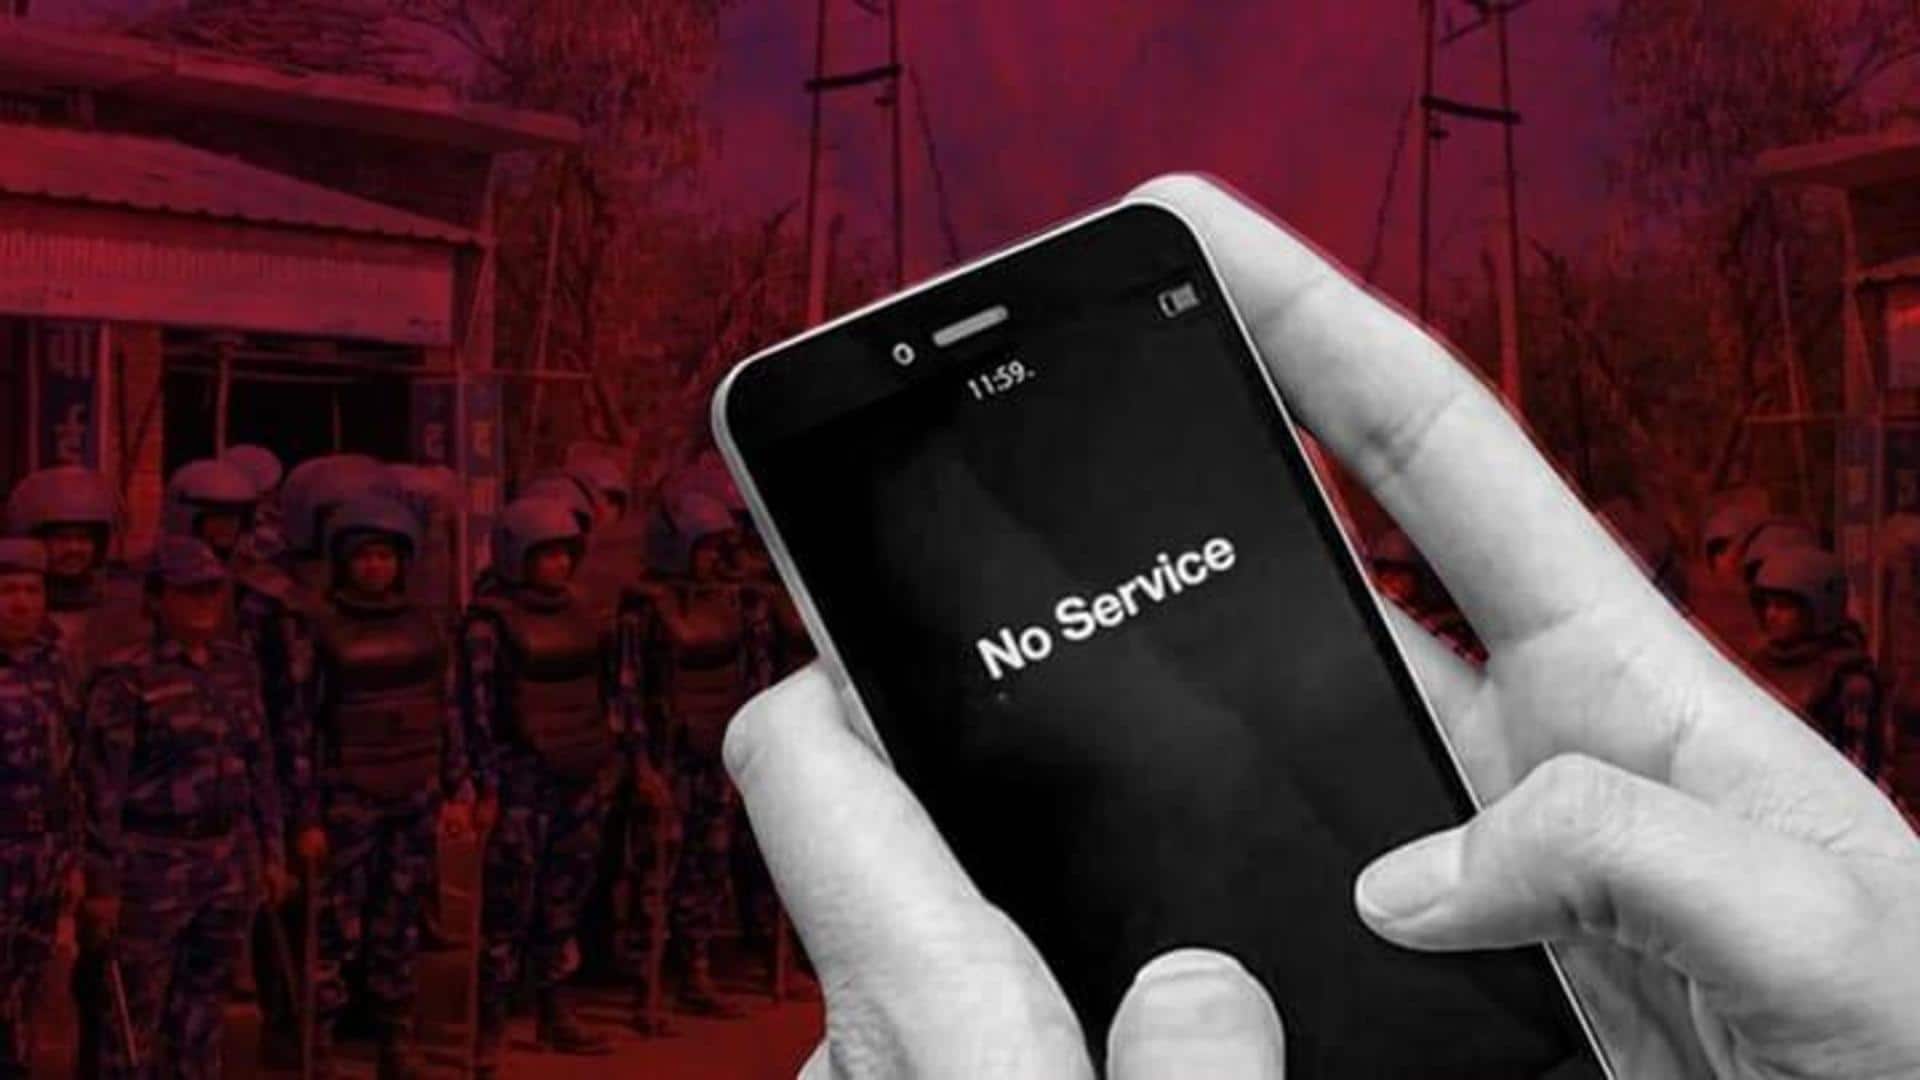 Most internet shutdowns in India imposed to prevent protests: Report